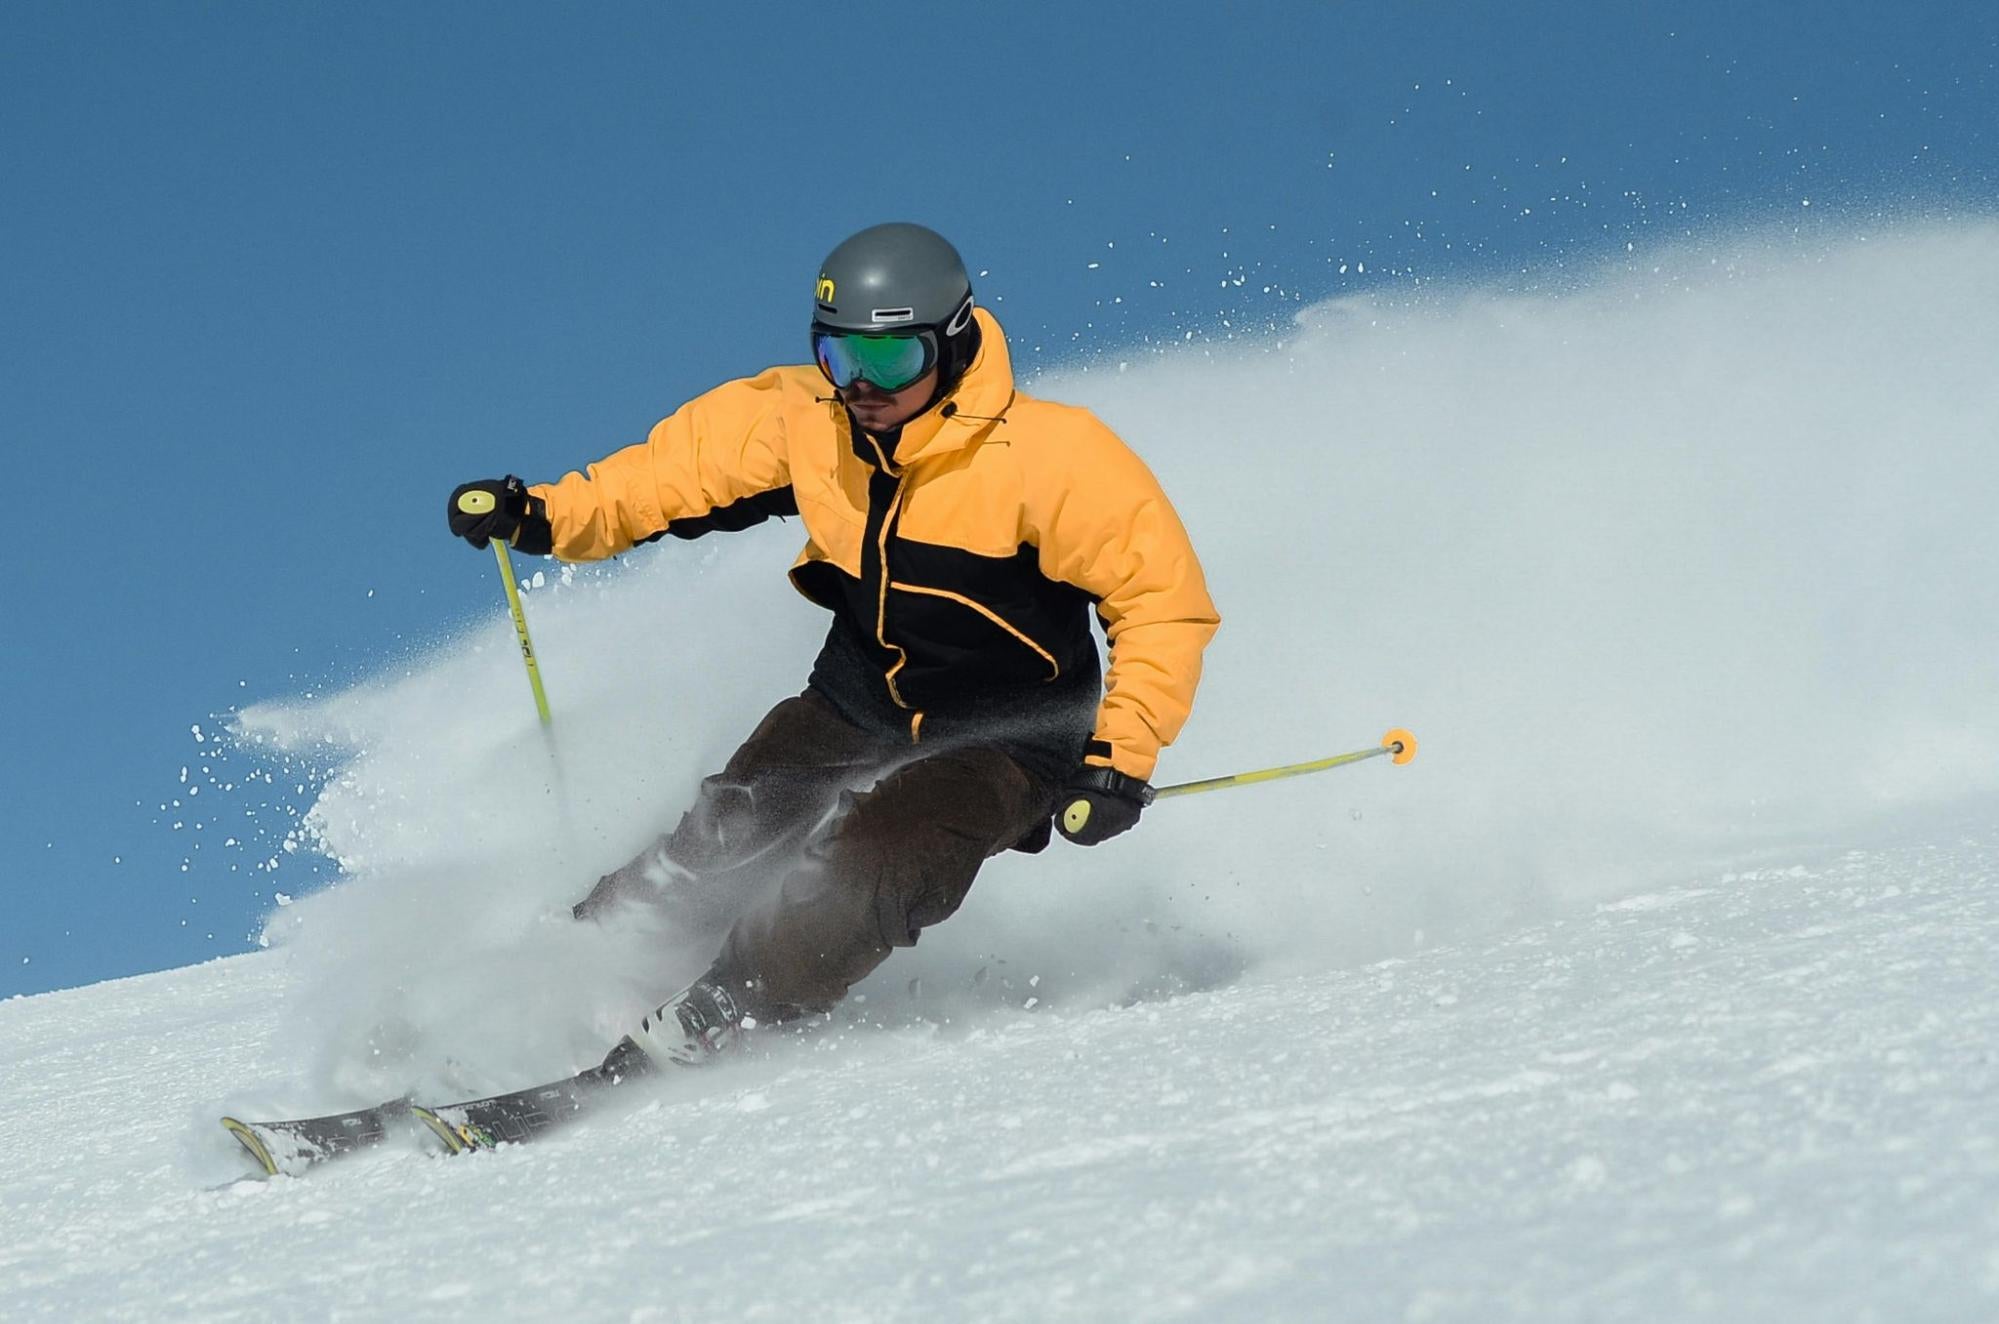 A man skiing down a slope.